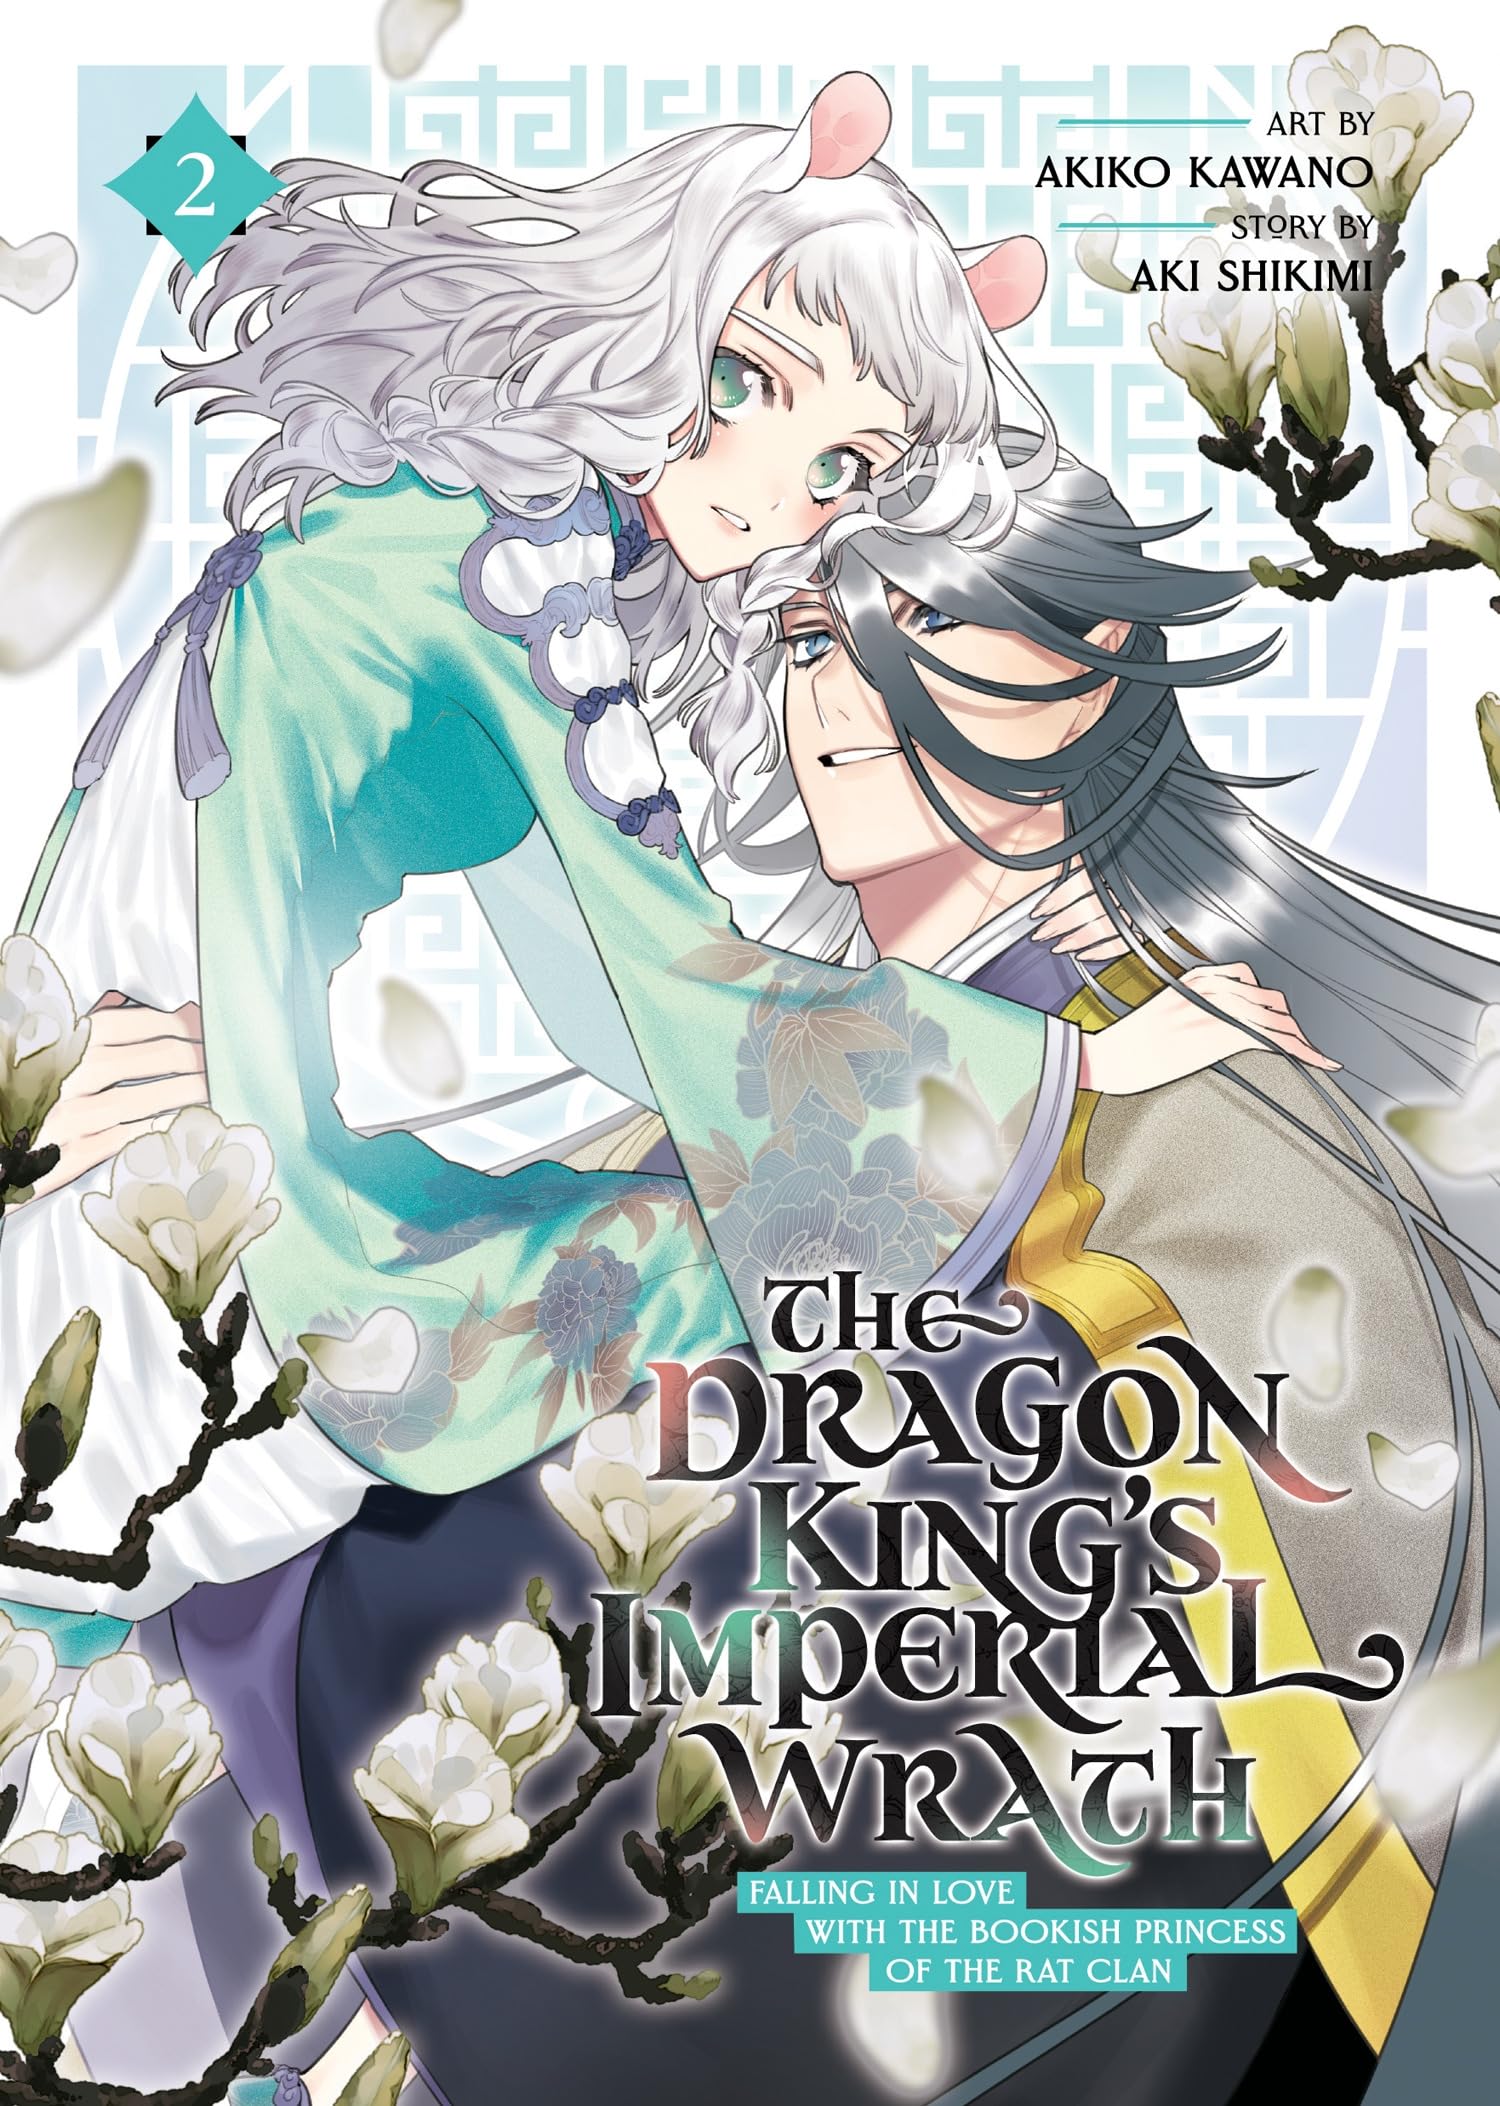 The Dragon King's Imperial Wrath: Falling in Love with the Bookish Princess of the Rat Clan Vol. 02